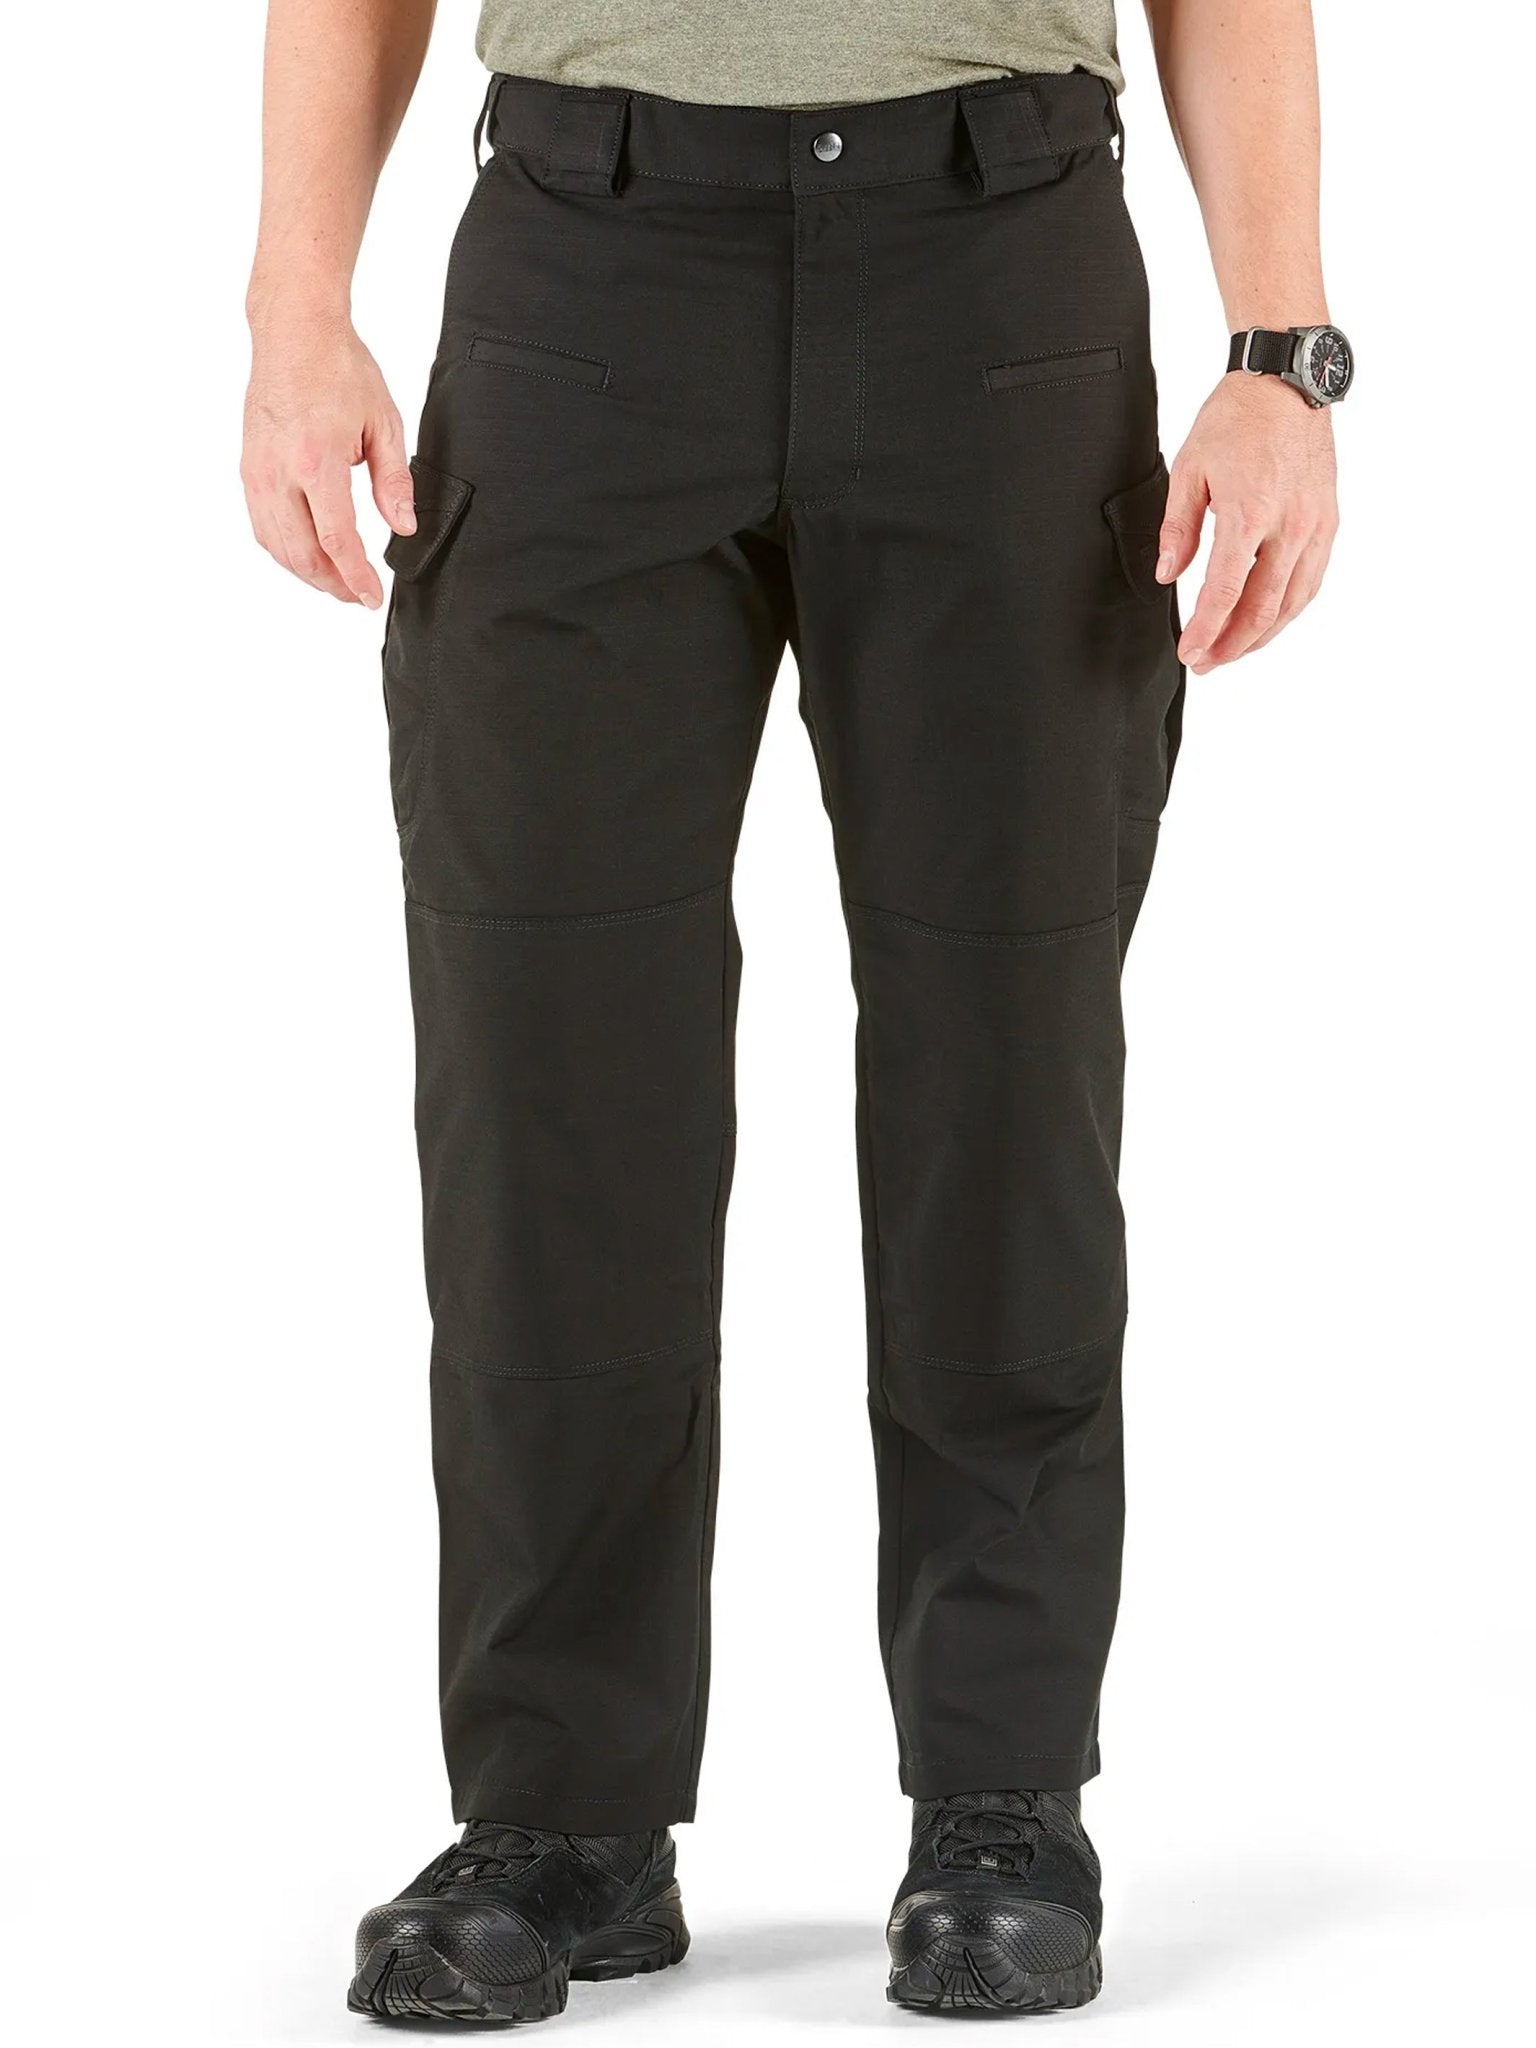 4elementsclothing5.11 Tactical5.11 Tactical - 5.11 STRYKE® PANT - Mens Stryke trouser Ripstop, Teflon finished, knee pocket - Style 74369Trousers & Jeans74369-186-30Wx30L